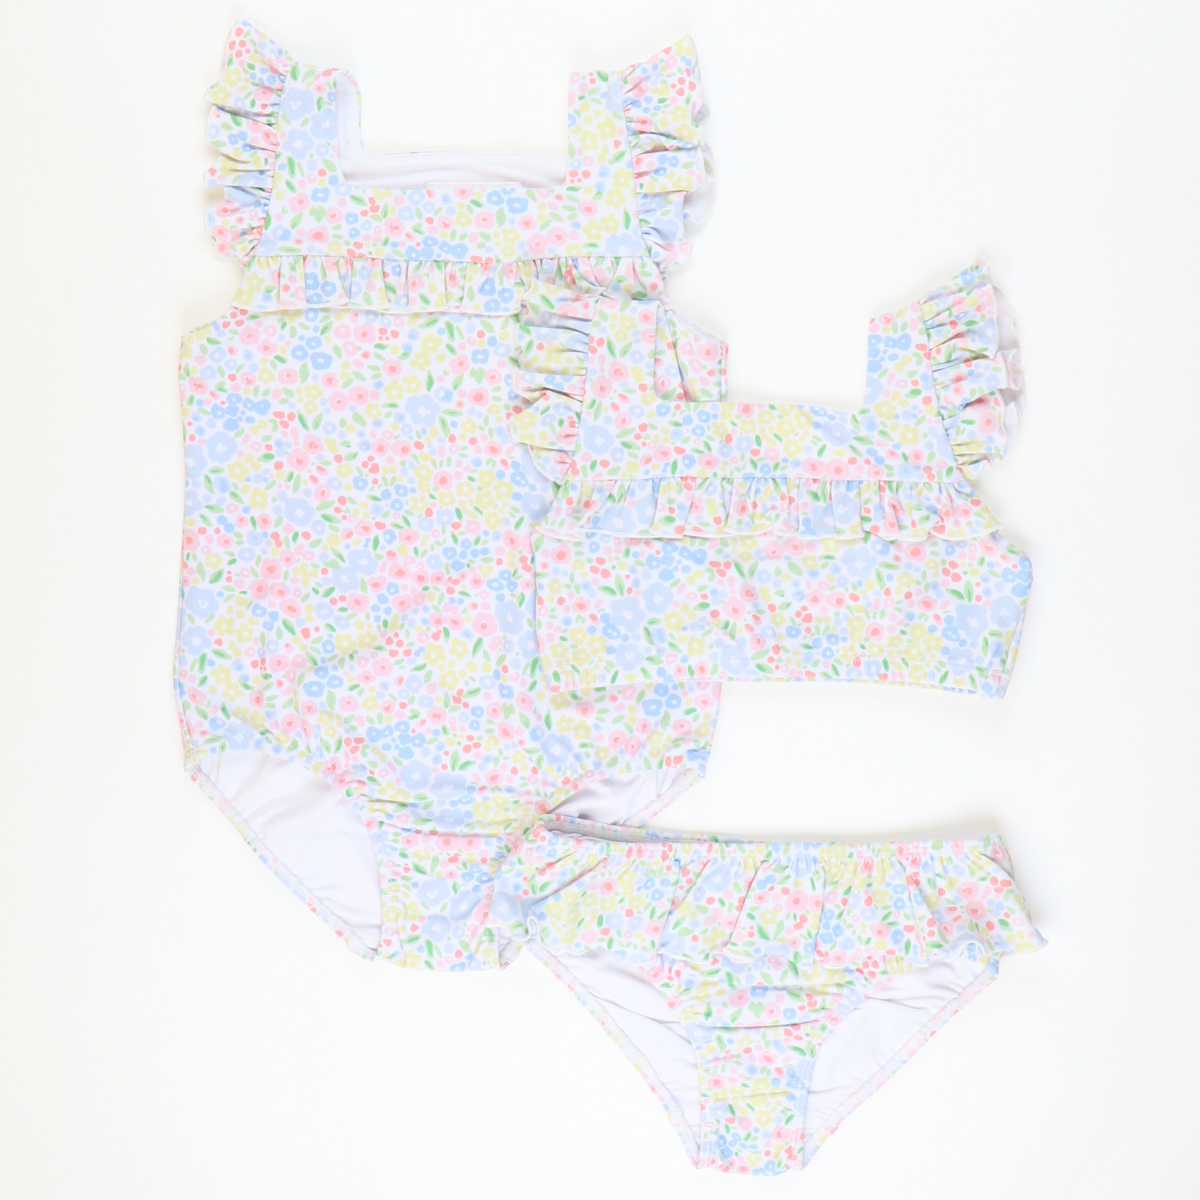 Two-Piece Swimsuit - Petite Meadow Floral